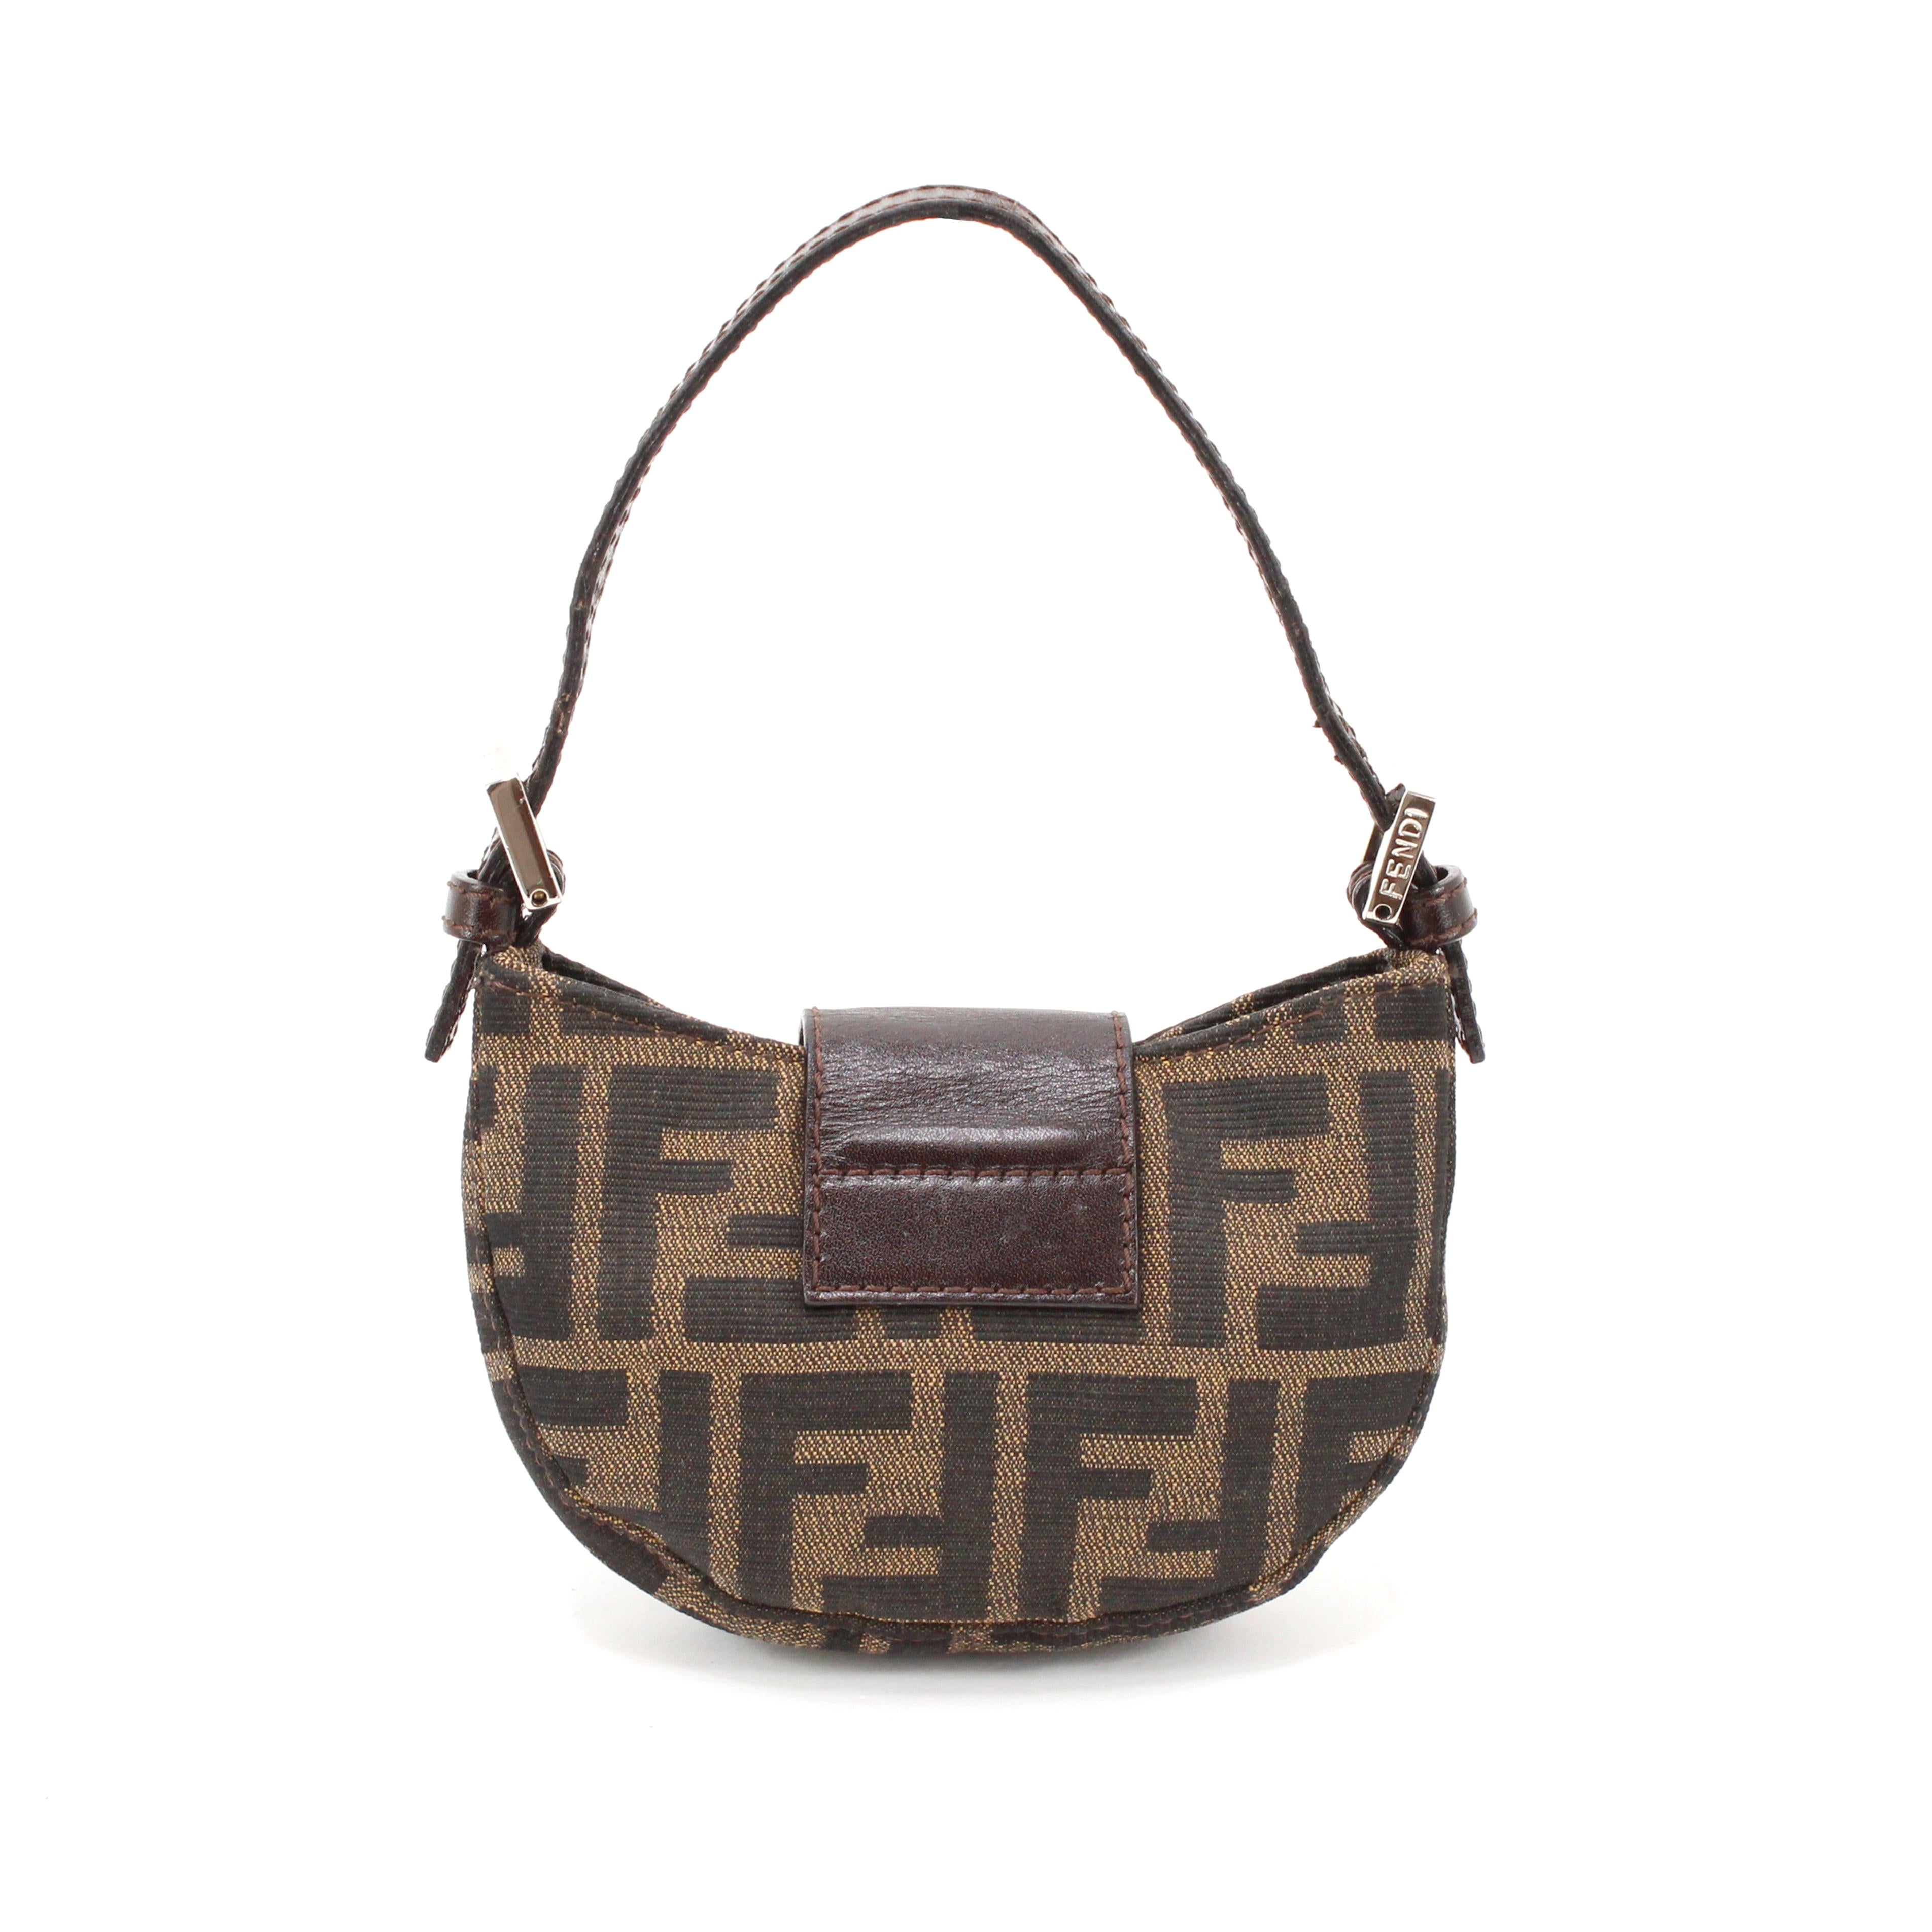 Fendi baguette croissant in brown zucca monogram canvas + brown leather, silver hardware.

Condition: 
Excellent.

Packing/accessories:
Dustbag.

Measurements:
Width: 13 cm
Height: 8 cm